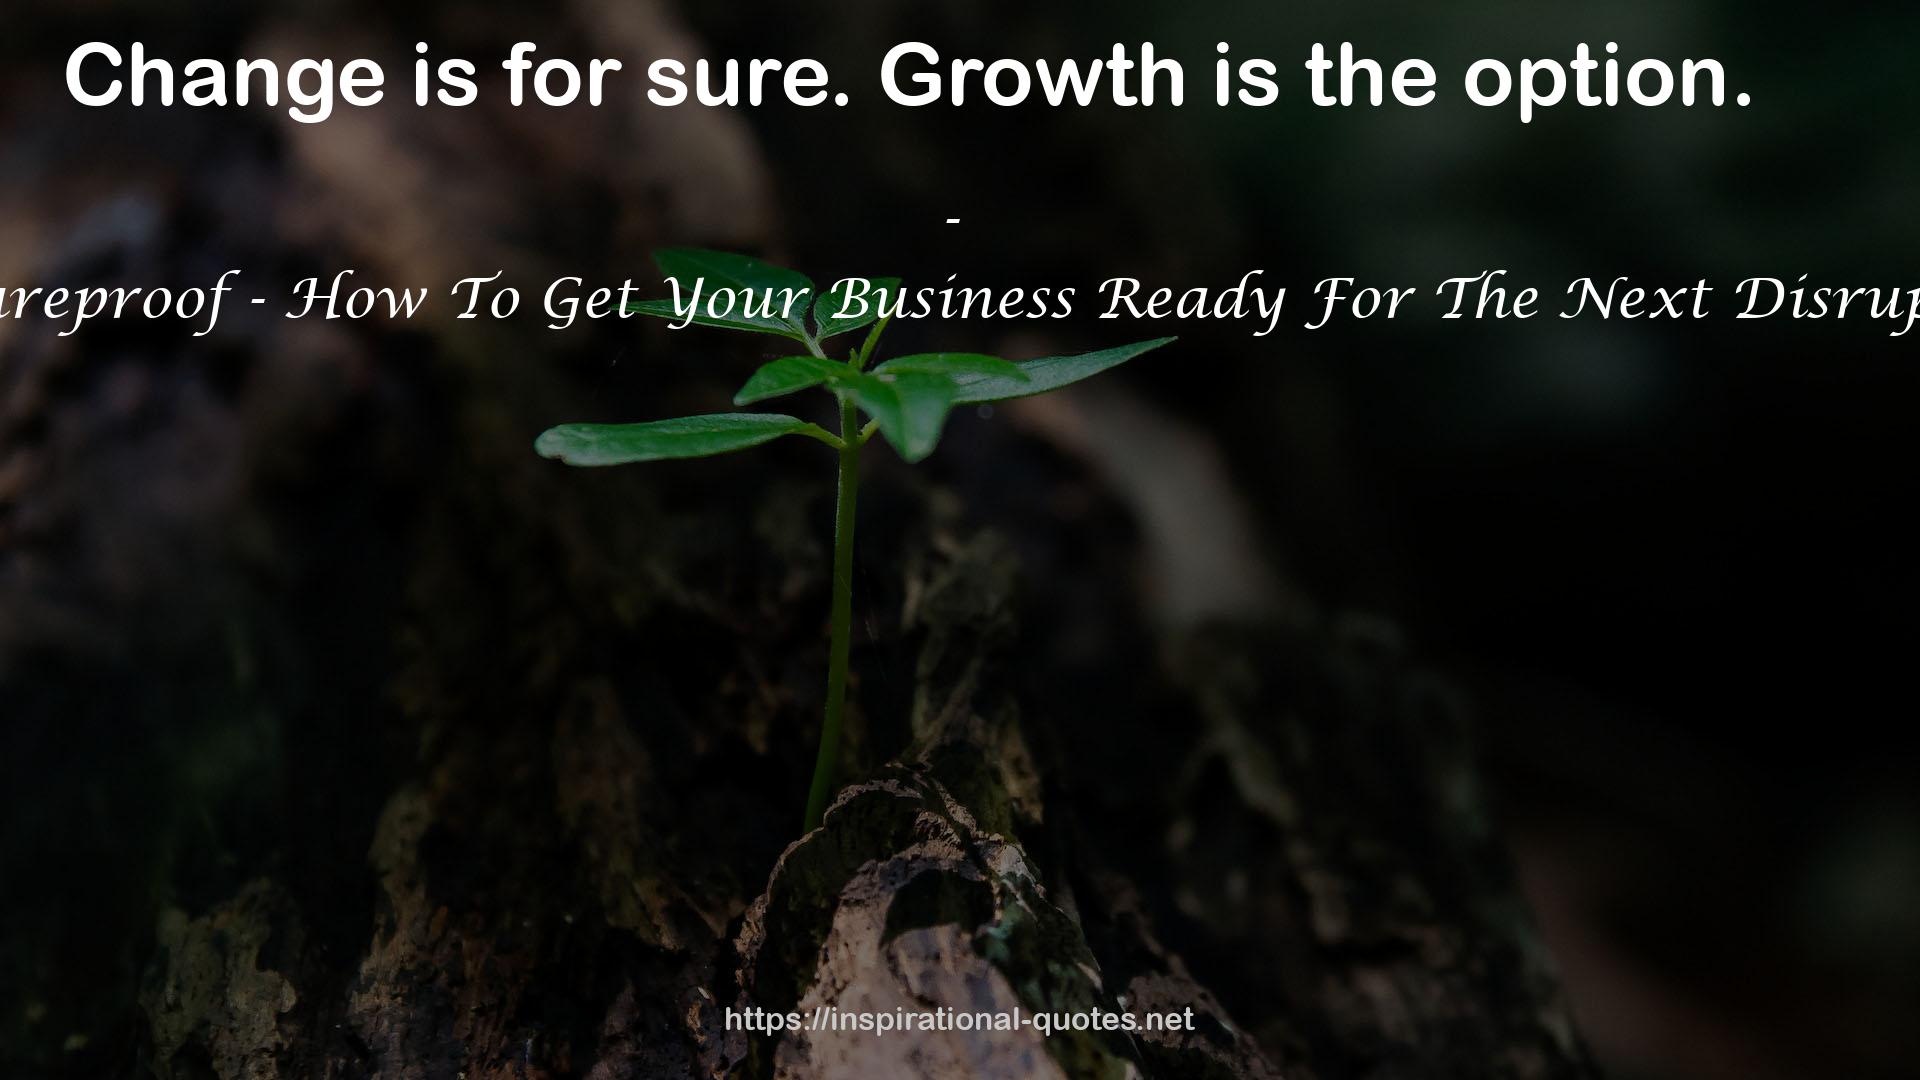 Futureproof - How To Get Your Business Ready For The Next Disruption QUOTES